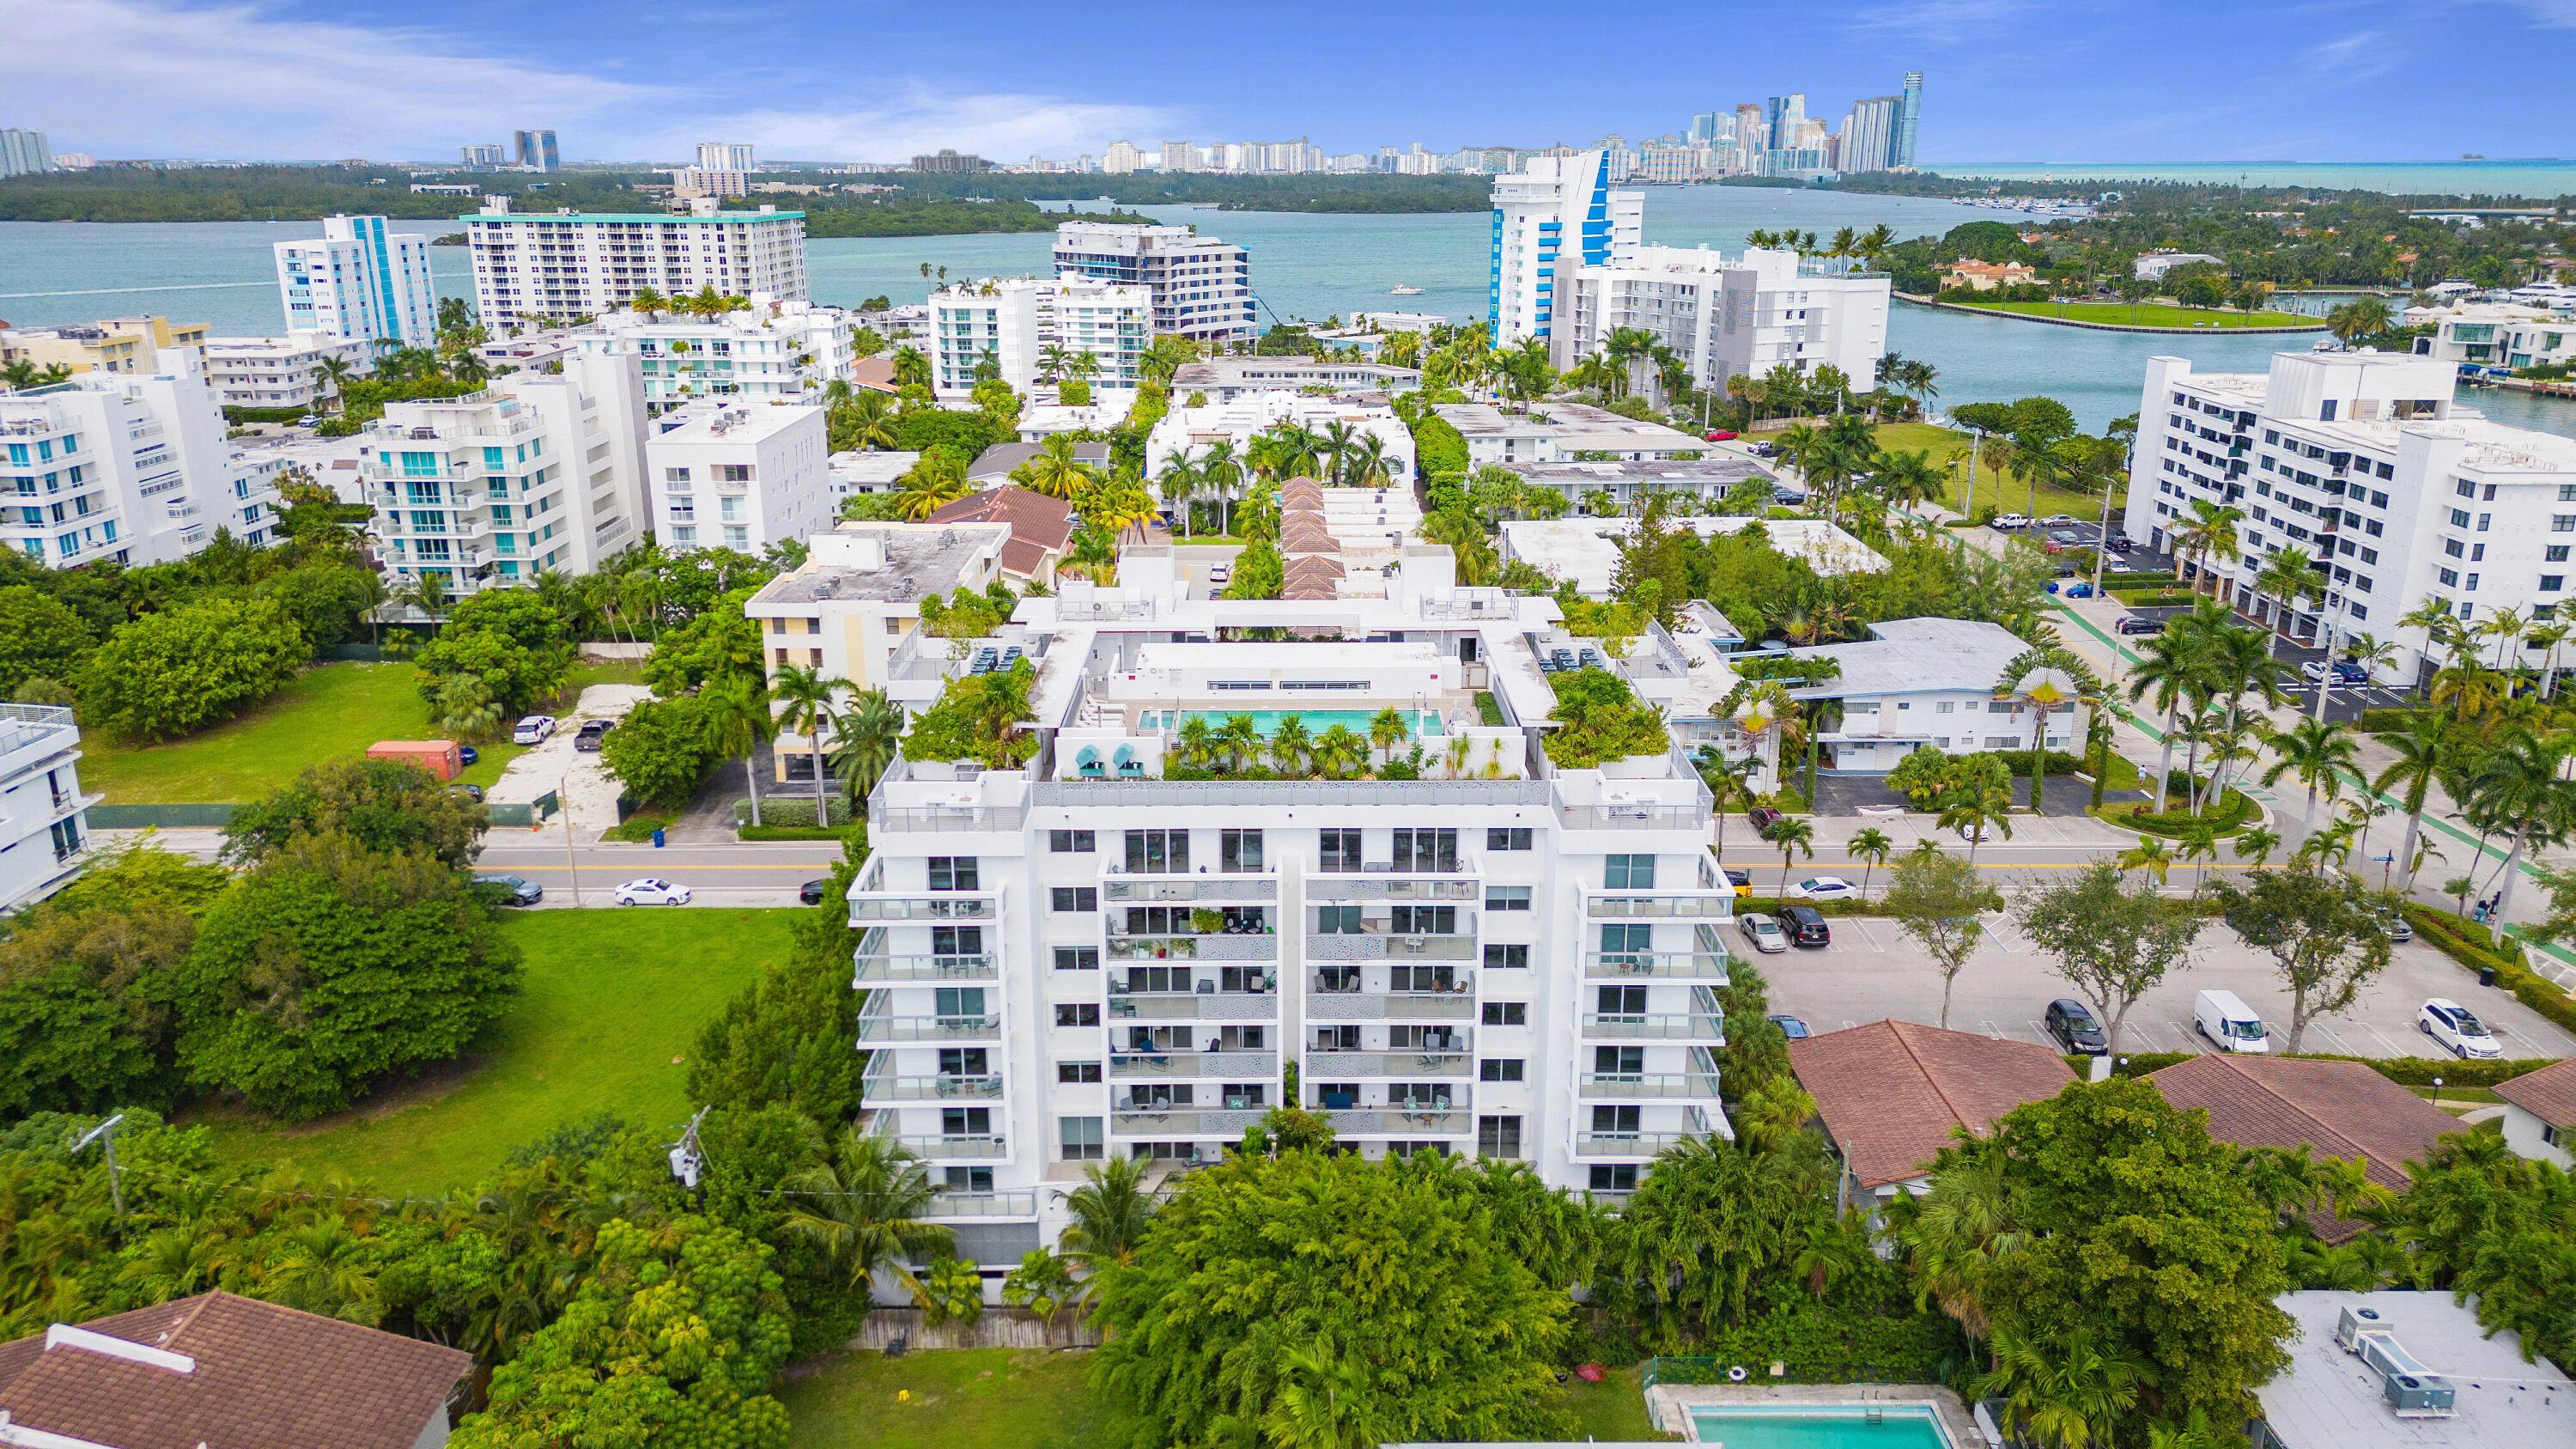 Discover the allure of Bay Harbor Islands, where the charm of a small town converges with the vibrancy of city living in a paradisiacal setting.